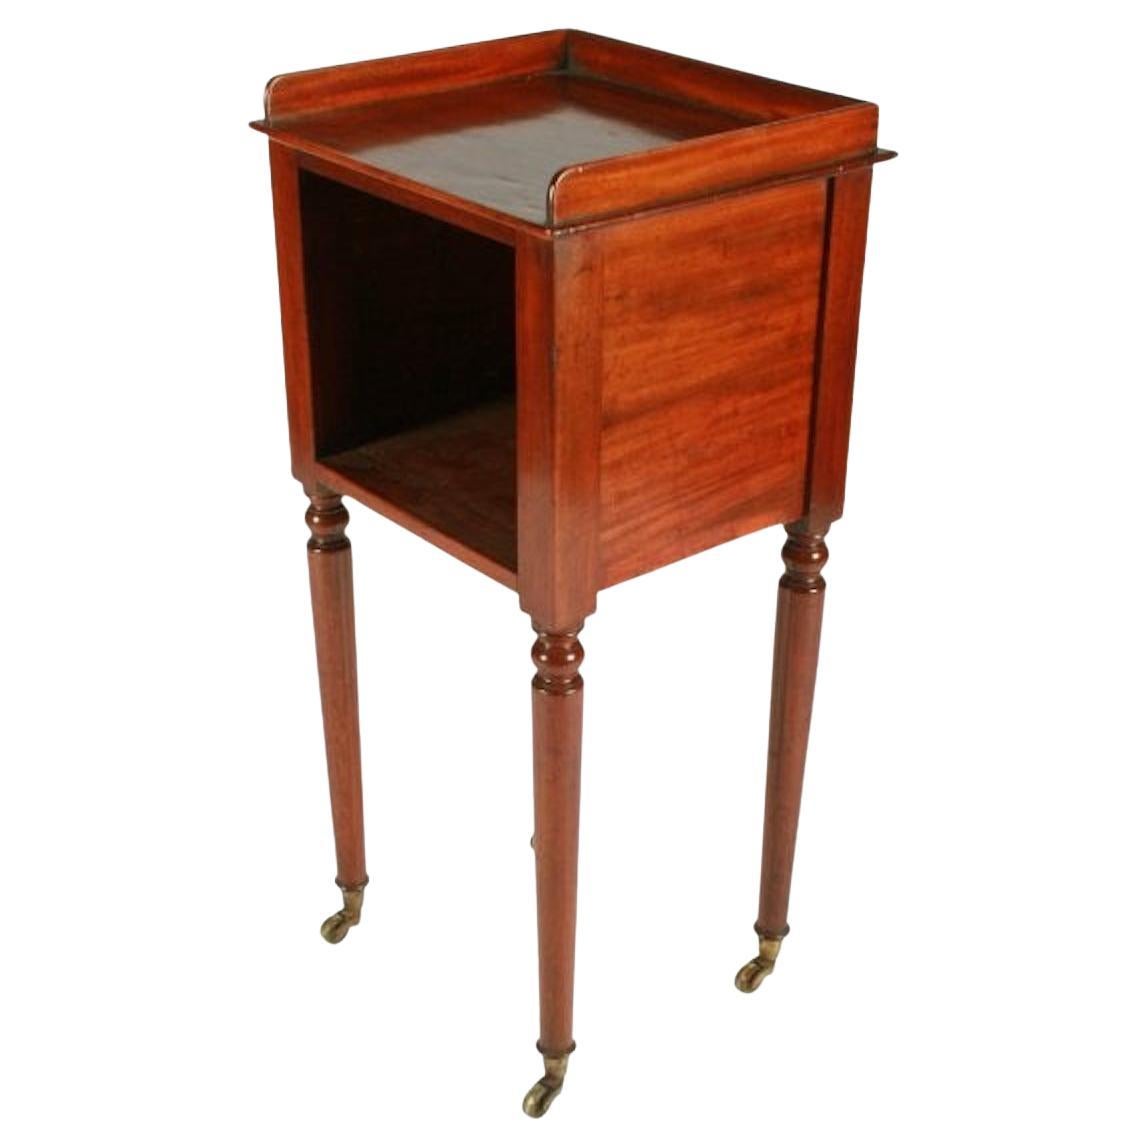 Victorian Mahogany bedside cabinet

A mid 19th century Victorian mahogany open front bedside cabinet.

The cabinet has a gallery back and stands on four turned legs with brass casters.

The cabinet is in good condition and has had the polish